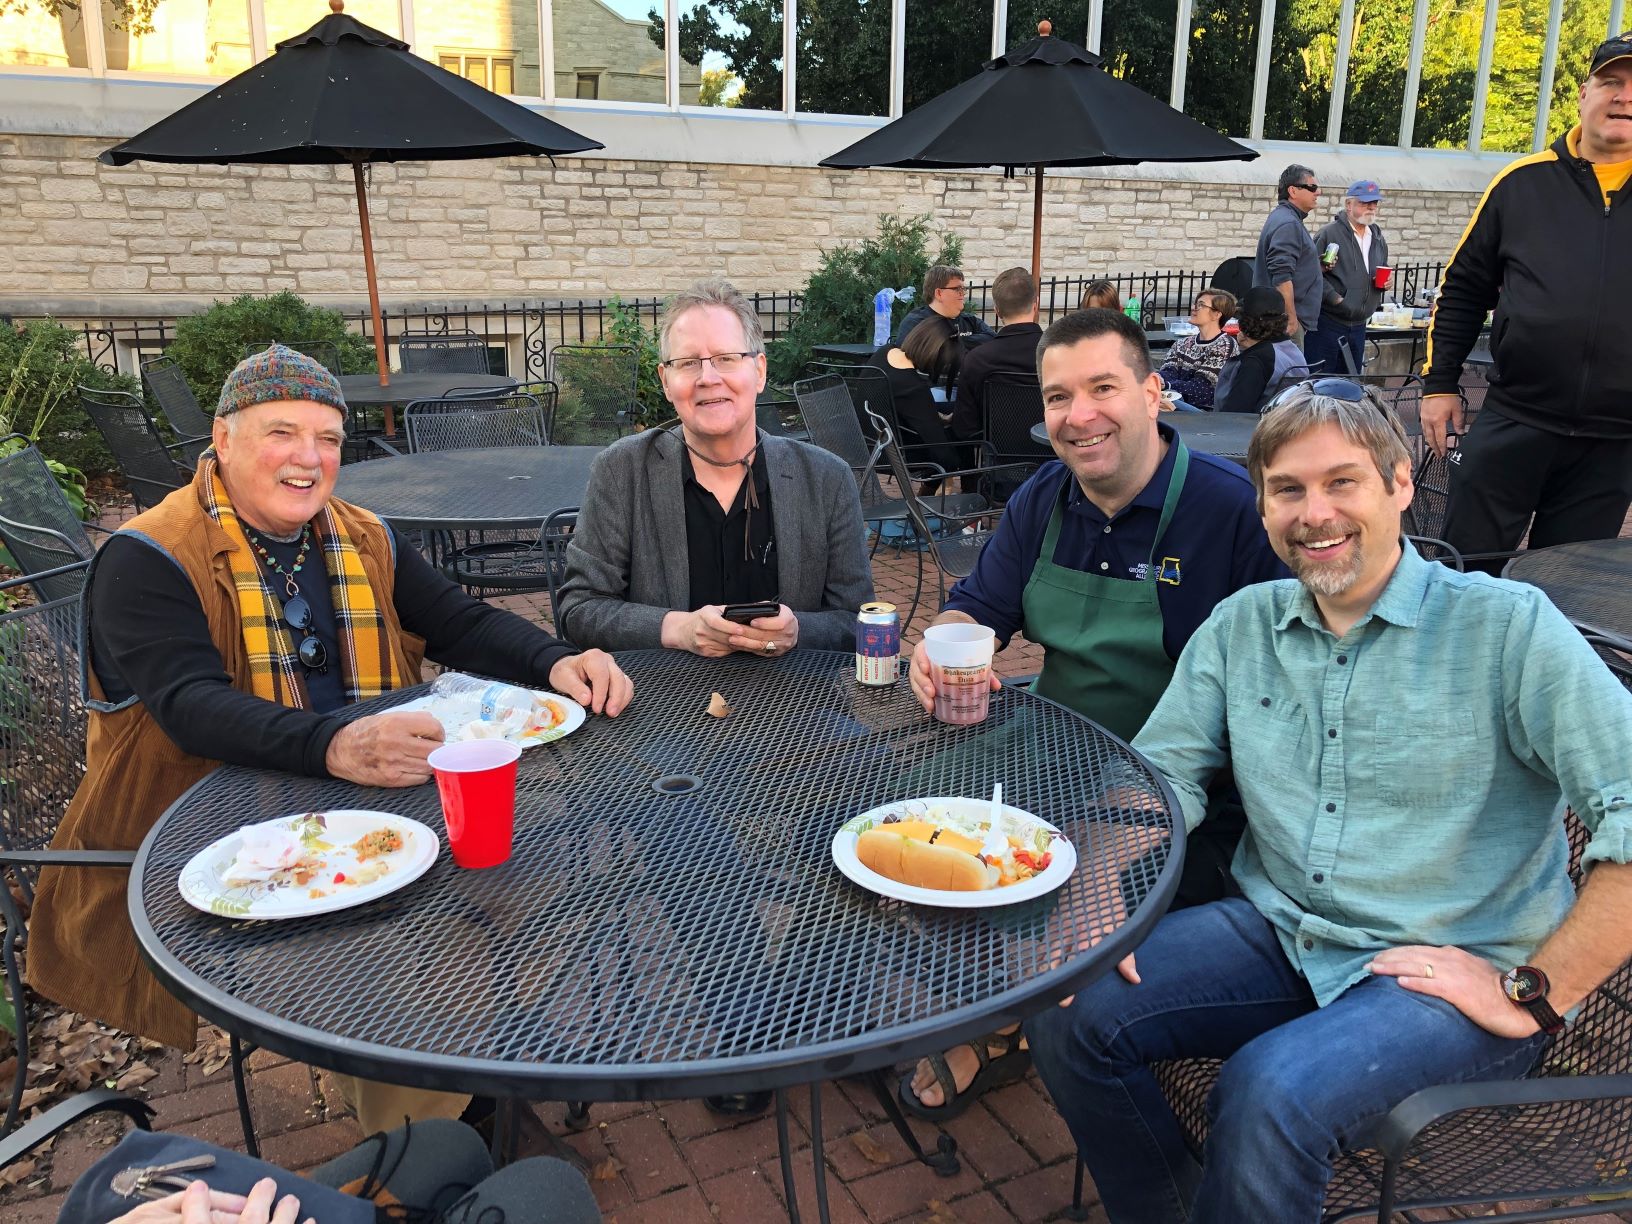 Some of Geography’s chairs past and present assembled at MU’S geography 2019 Homecoming tailgate party. From left: Kit Salter, Joseph Hobbs, Mike Urban, and Soren Larsen.